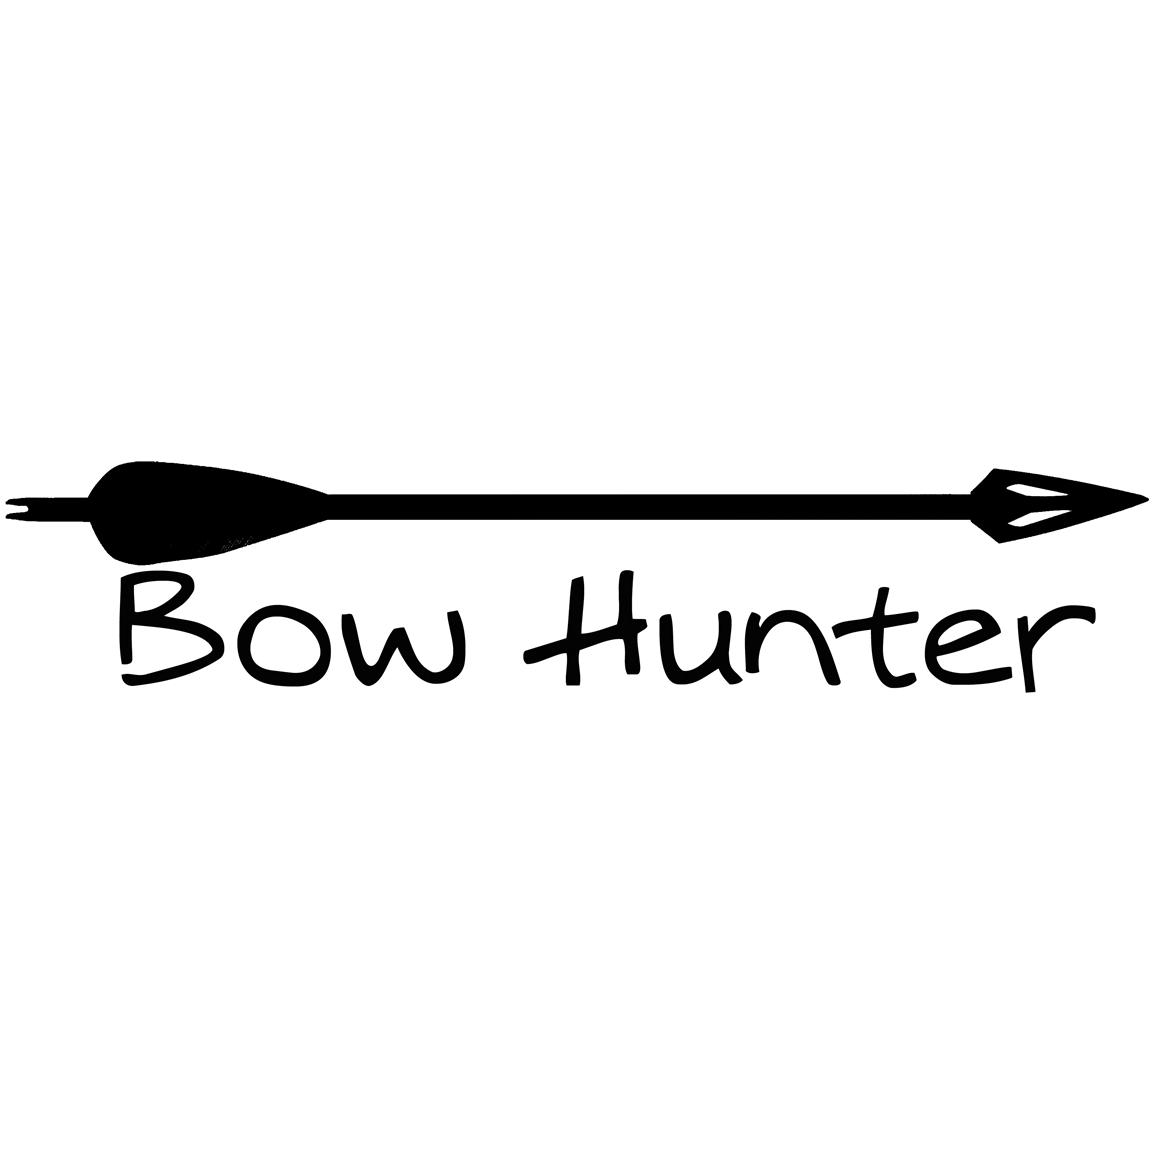 Outdoor Decals Bowhunter Decal - 170967, Bow Tuning at ...